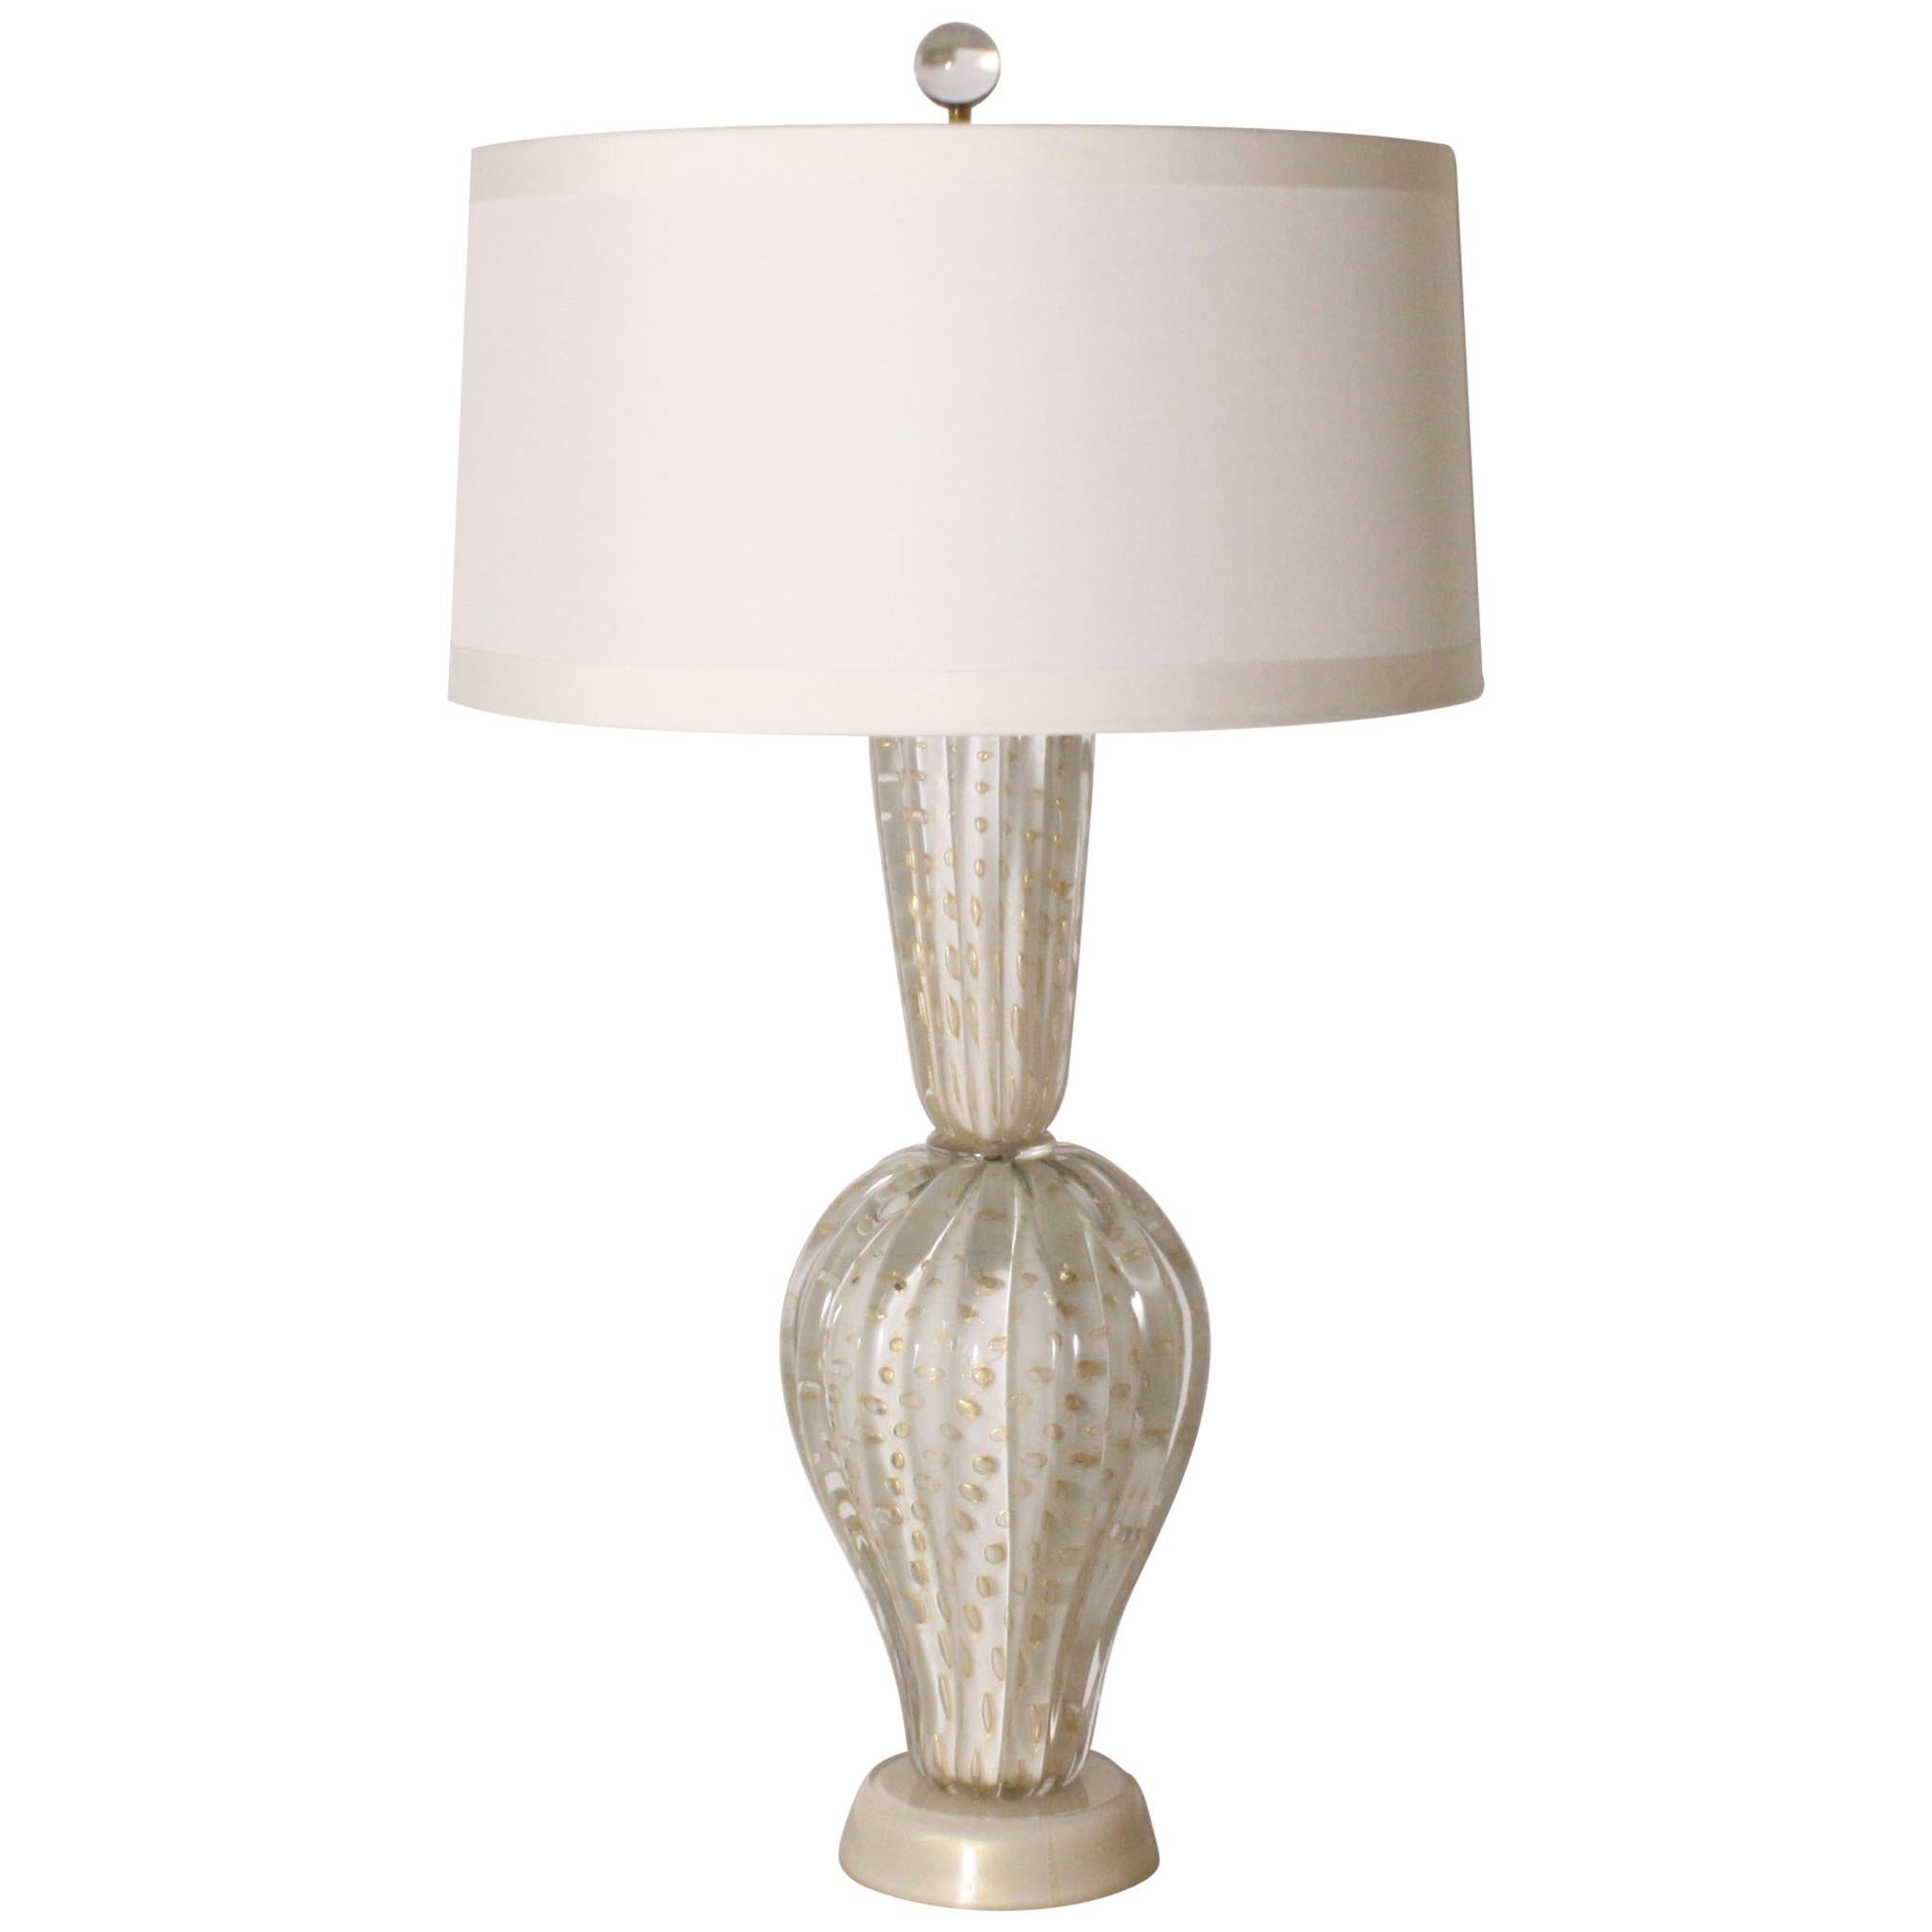 Barovier & Toso Ivory Lamp with Gold Inclusions, circa 1950